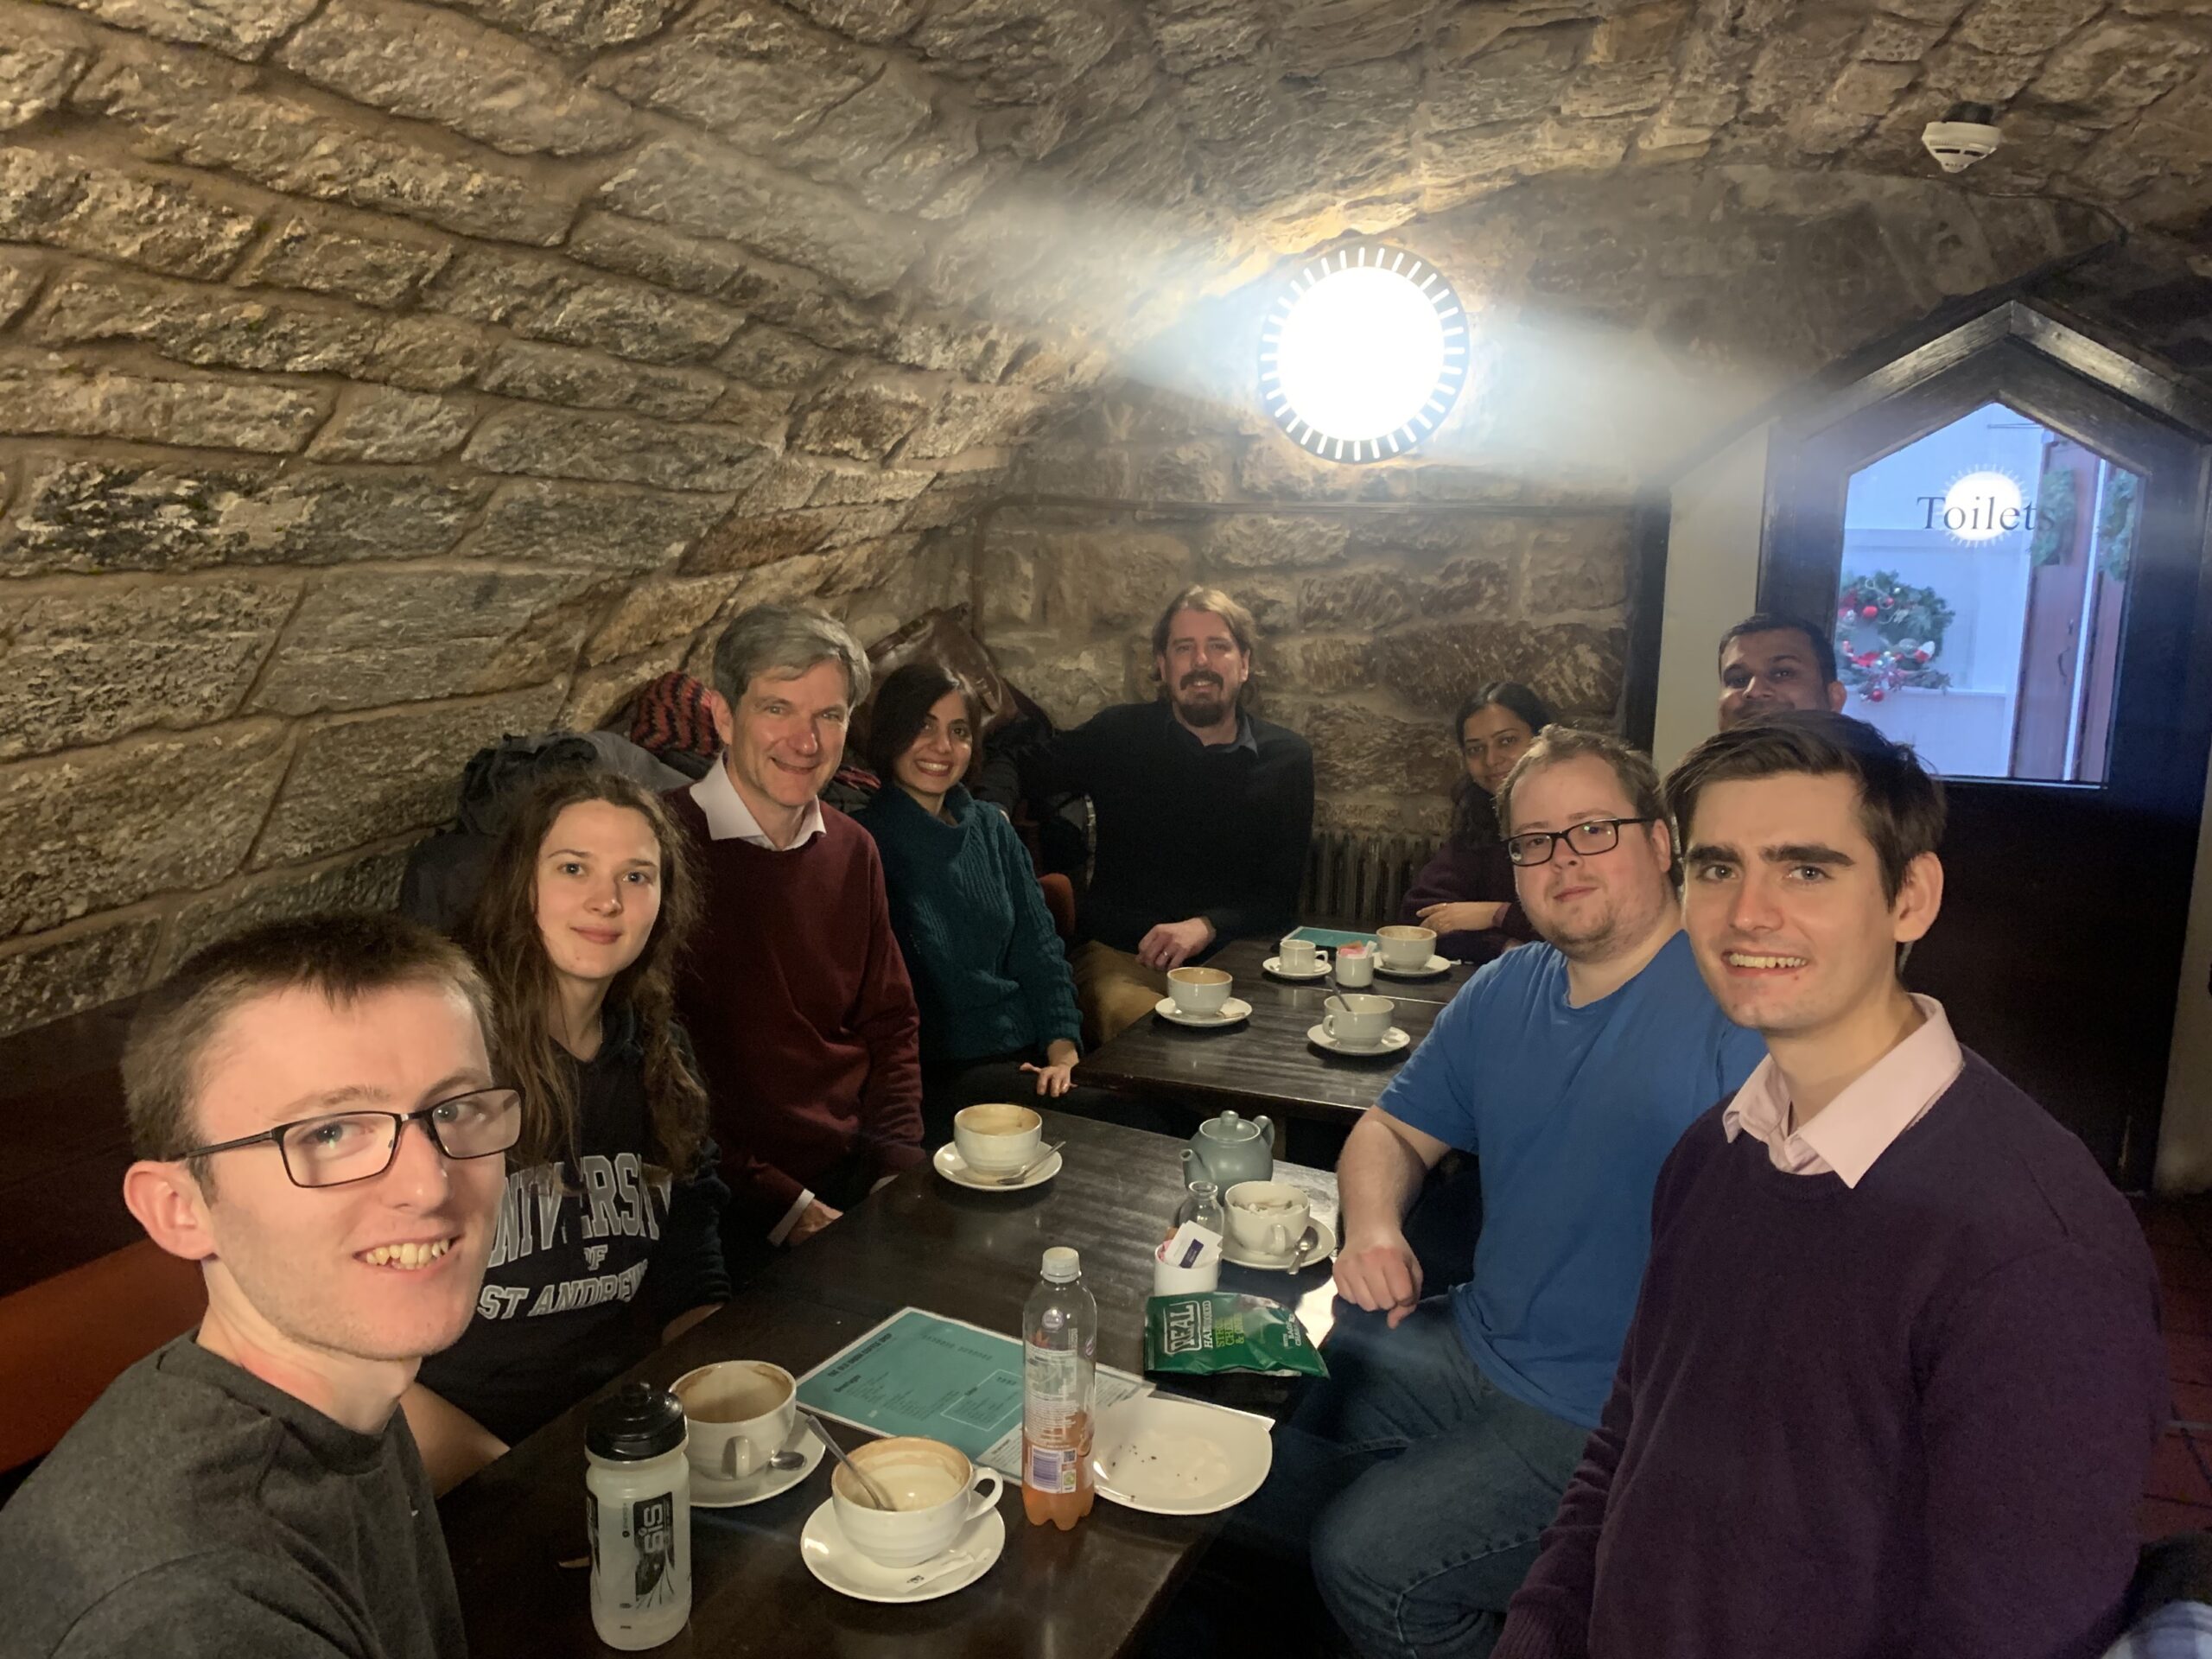 Some of the group are sat together under the stone walls and roof of the old students union. From front to back. Left: Liam, Egle, Ifor, Mina and Ross. Right: Thomas, David, Ramakant and Sagarika.